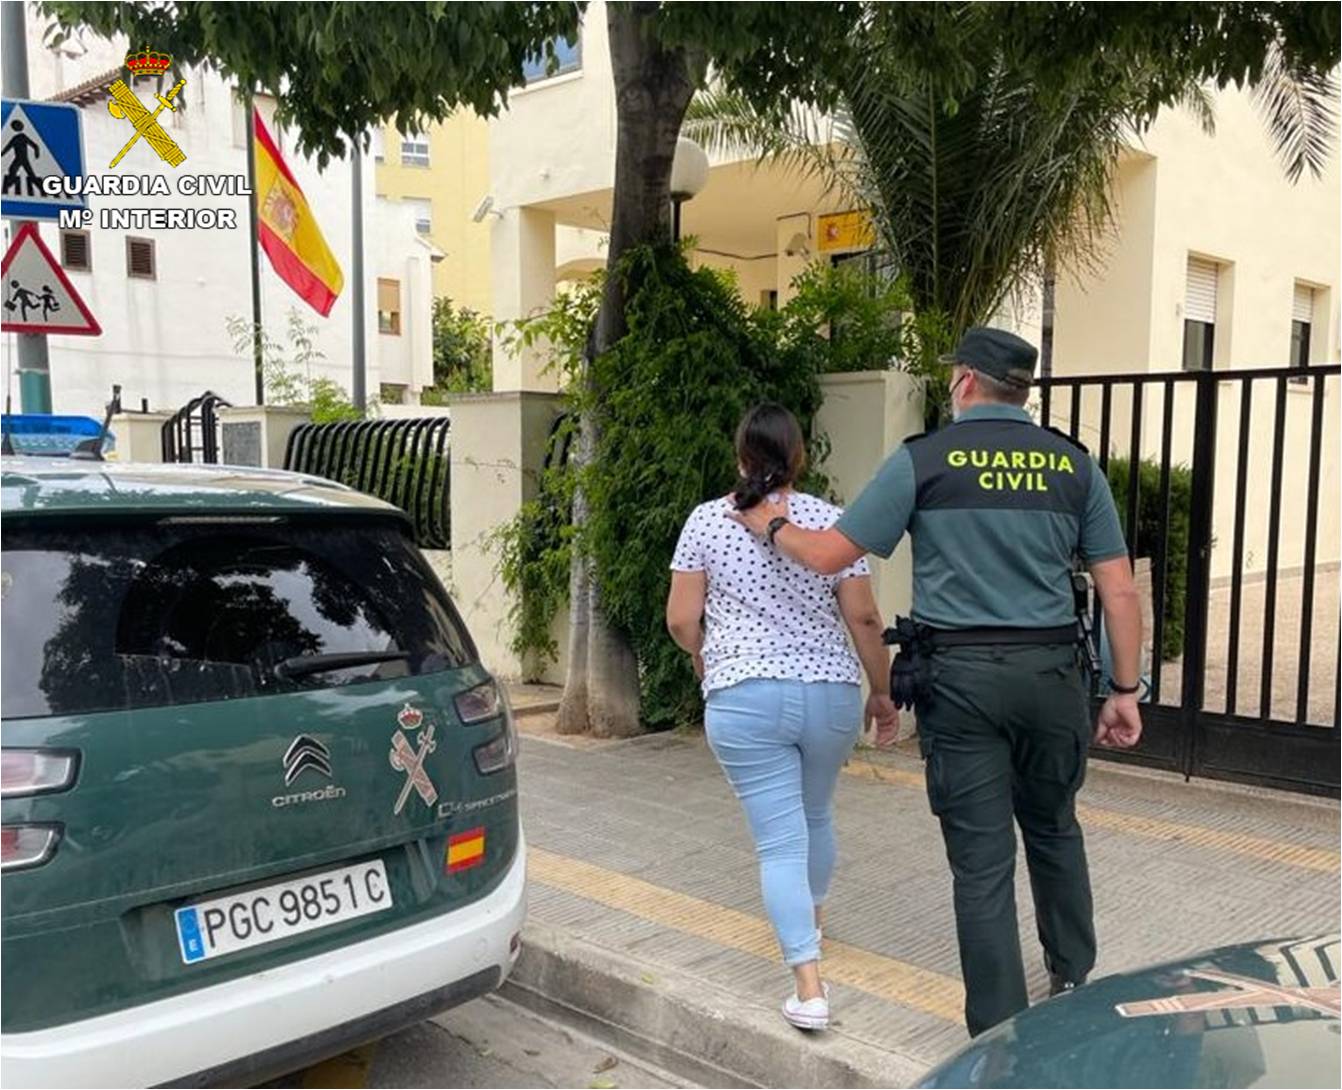 Bank Robbers Who Stalked Customers Who Made Large Cash Withdrawals Are Arrested On The Costa Blanca In Spain